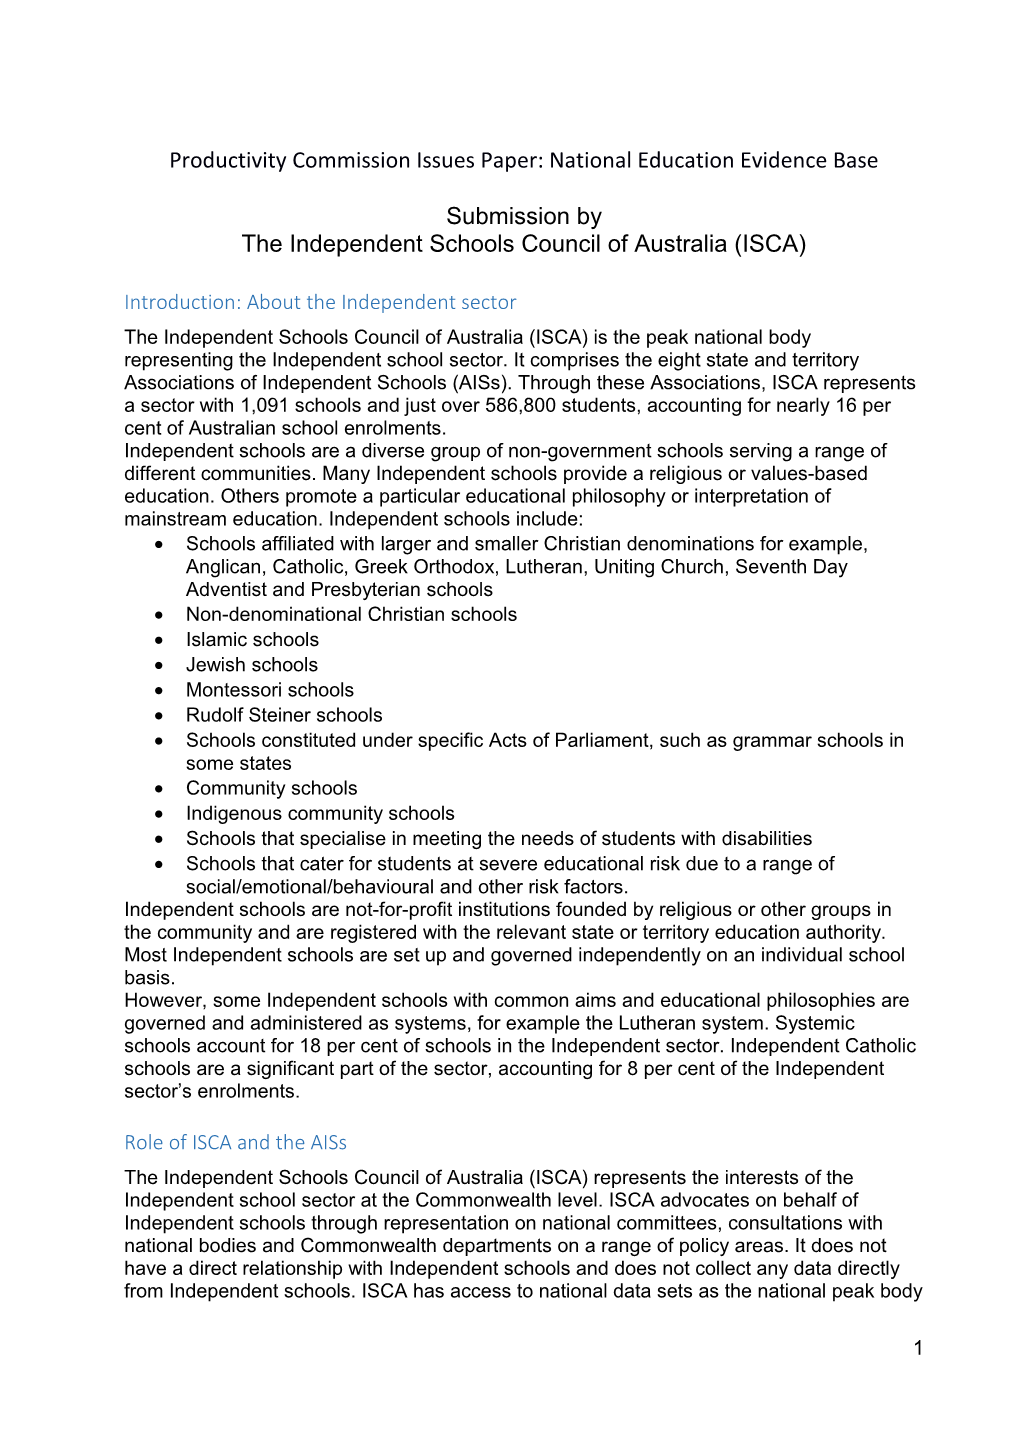 Submission 39 - Independent Schools Council of Australia - Education Evidence Base - Public